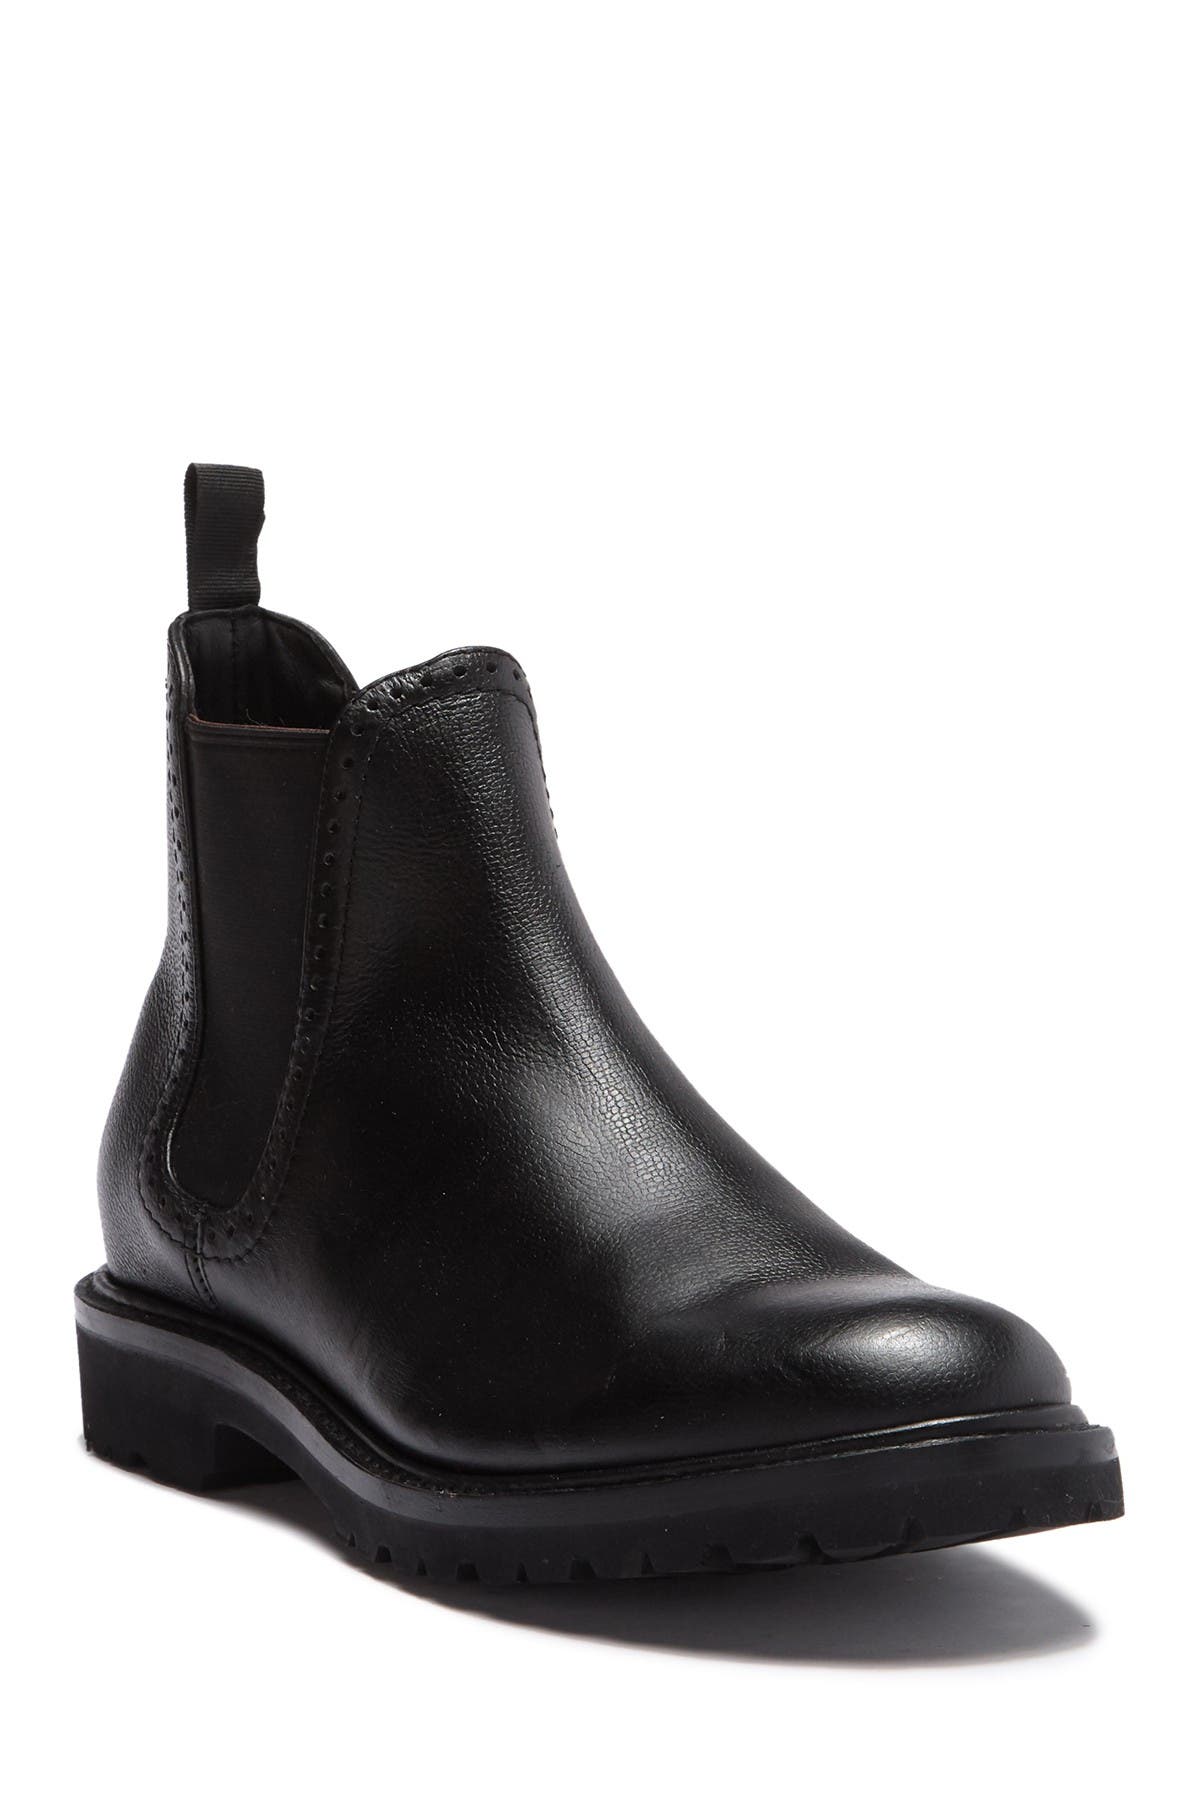 Wolverine | Cromwell Chelsea Boot 